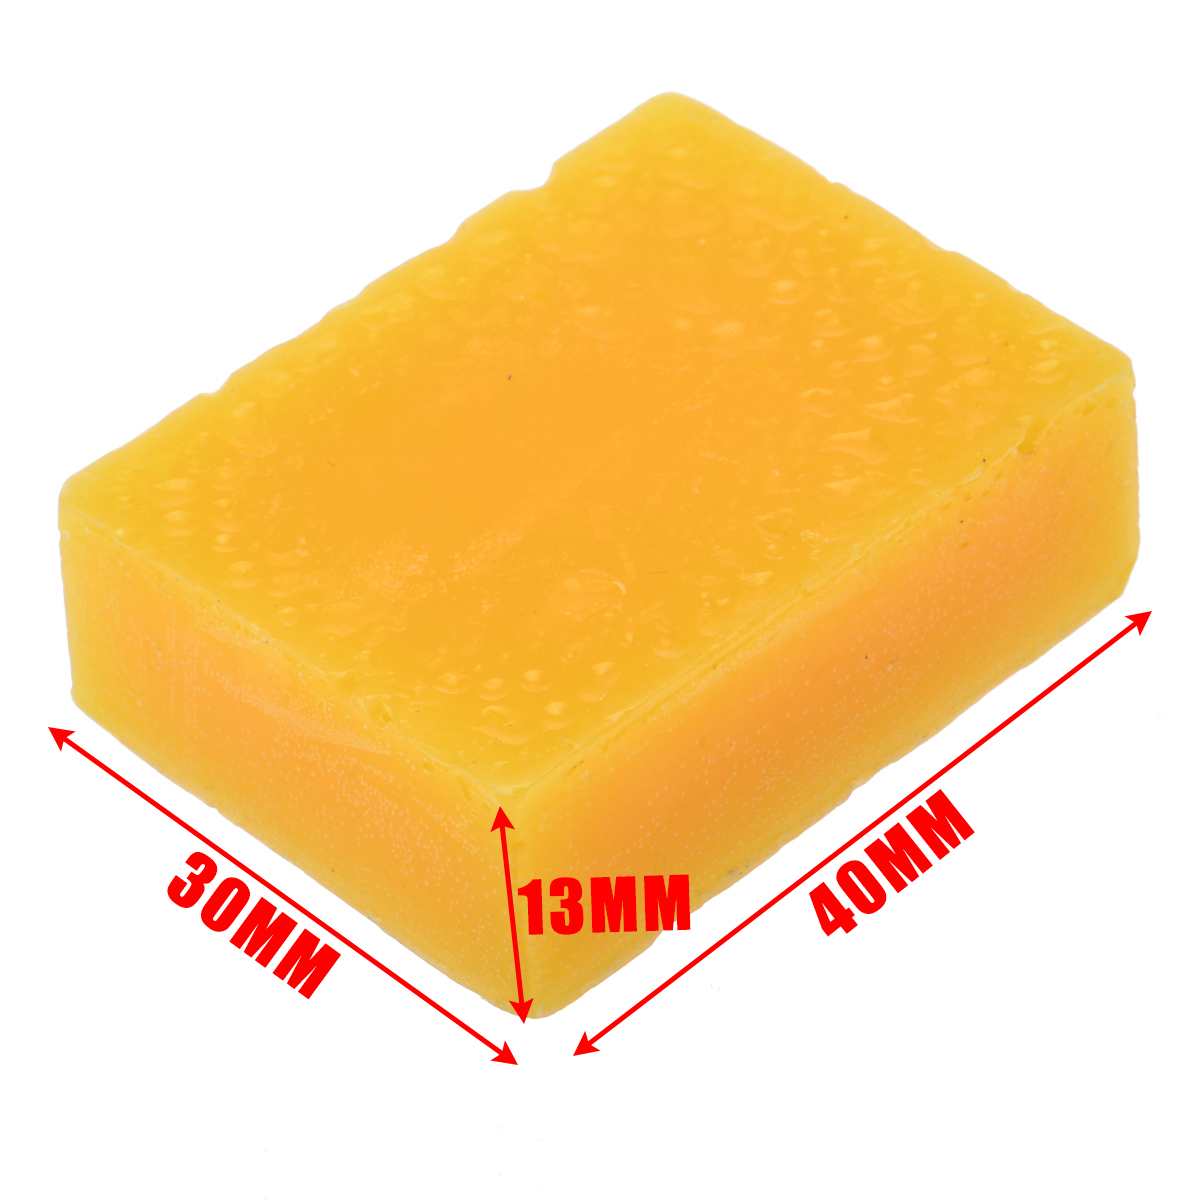 15g Natural Beeswax Candle Making Maintenance Protect Floor Polishing Cleaning Beeswax Solid Wood Furniture Polishing Tools